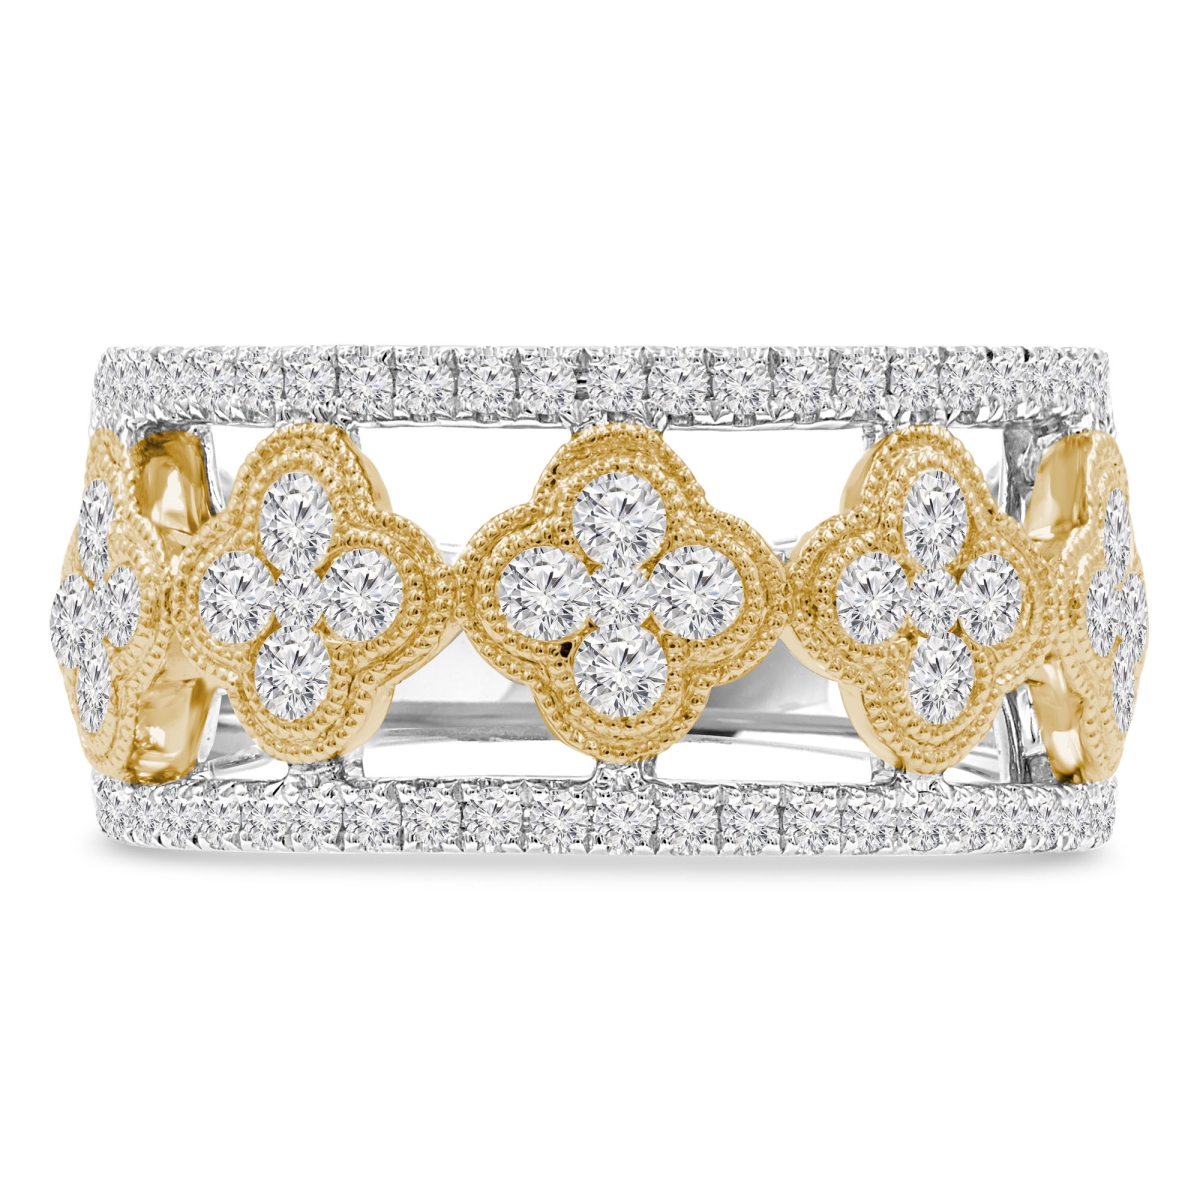 Picture of Majesty Diamonds MDR210140-6 1 CTW Round Diamond Cocktail Ring in 14K Two-Tone Gold - Size 6